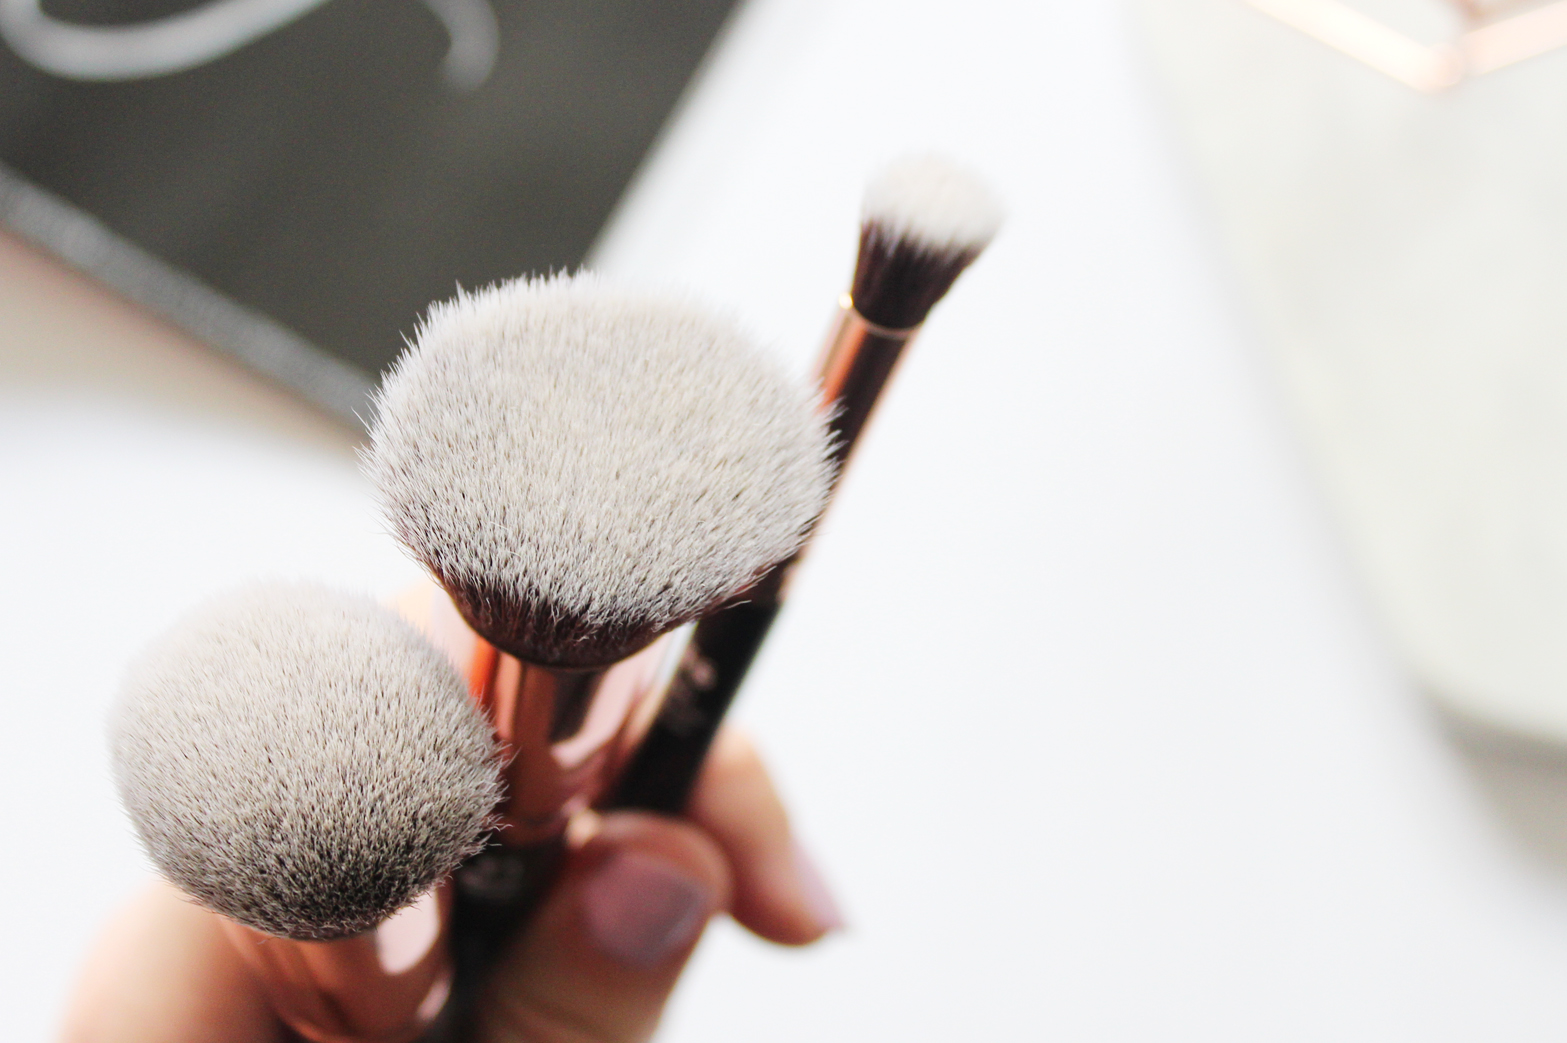 SIMPLY ESSENTIAL | Pro Series Makeup Brushes - Review - CassandraMyee